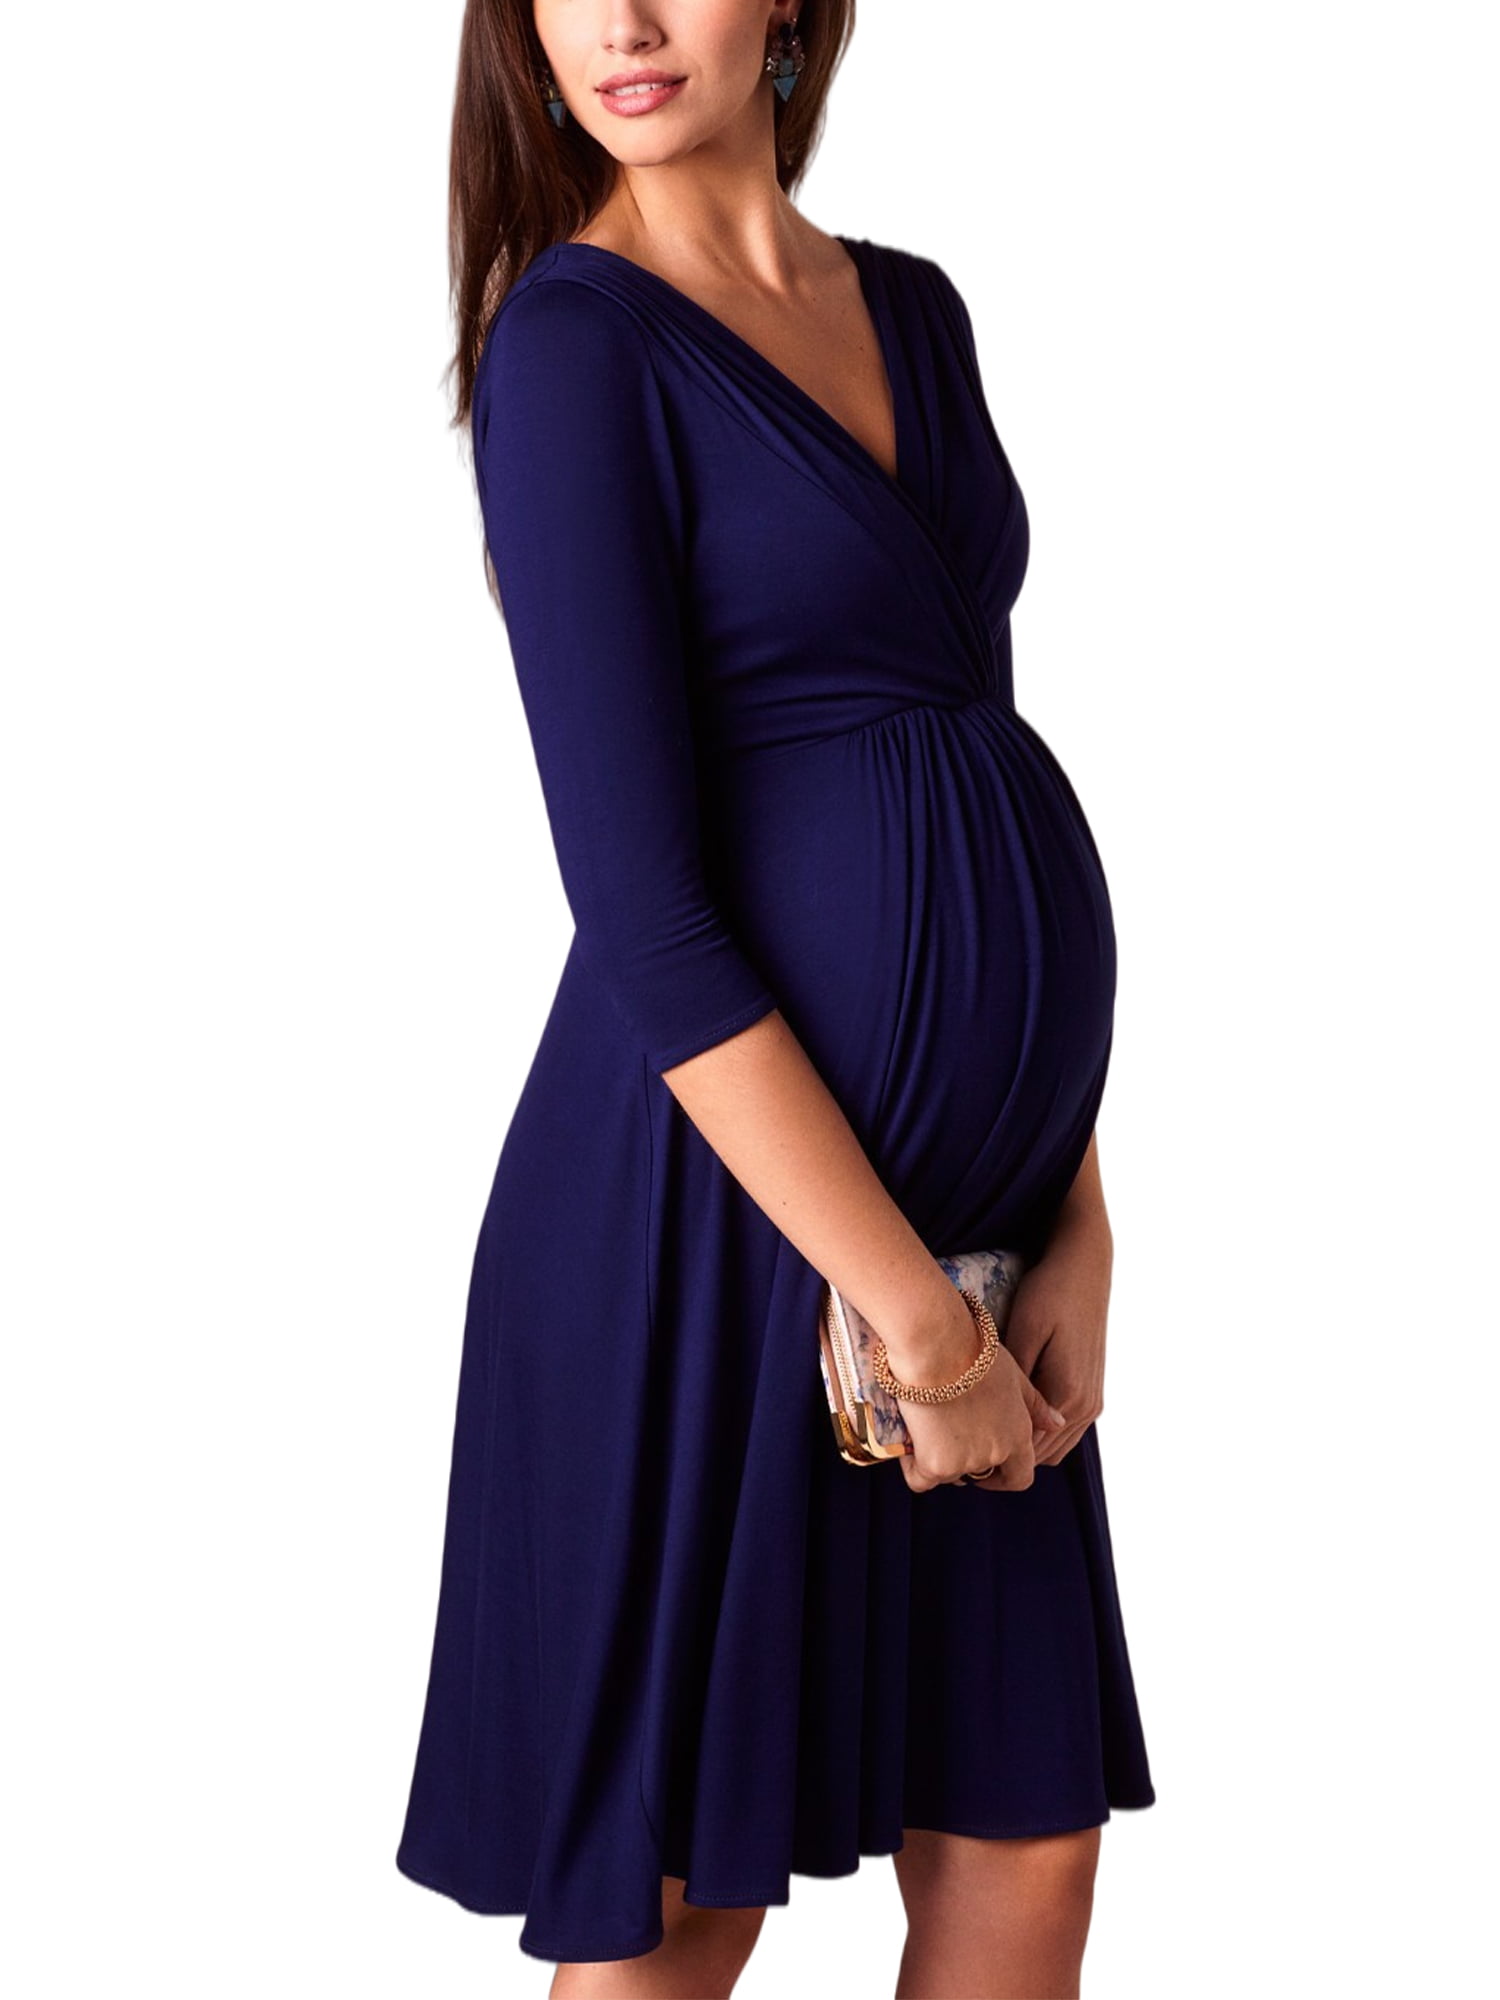 Women Button Maternity Dresses Short Sleeve Swing Mini Dresses for Daily Wearing and Baby Shower